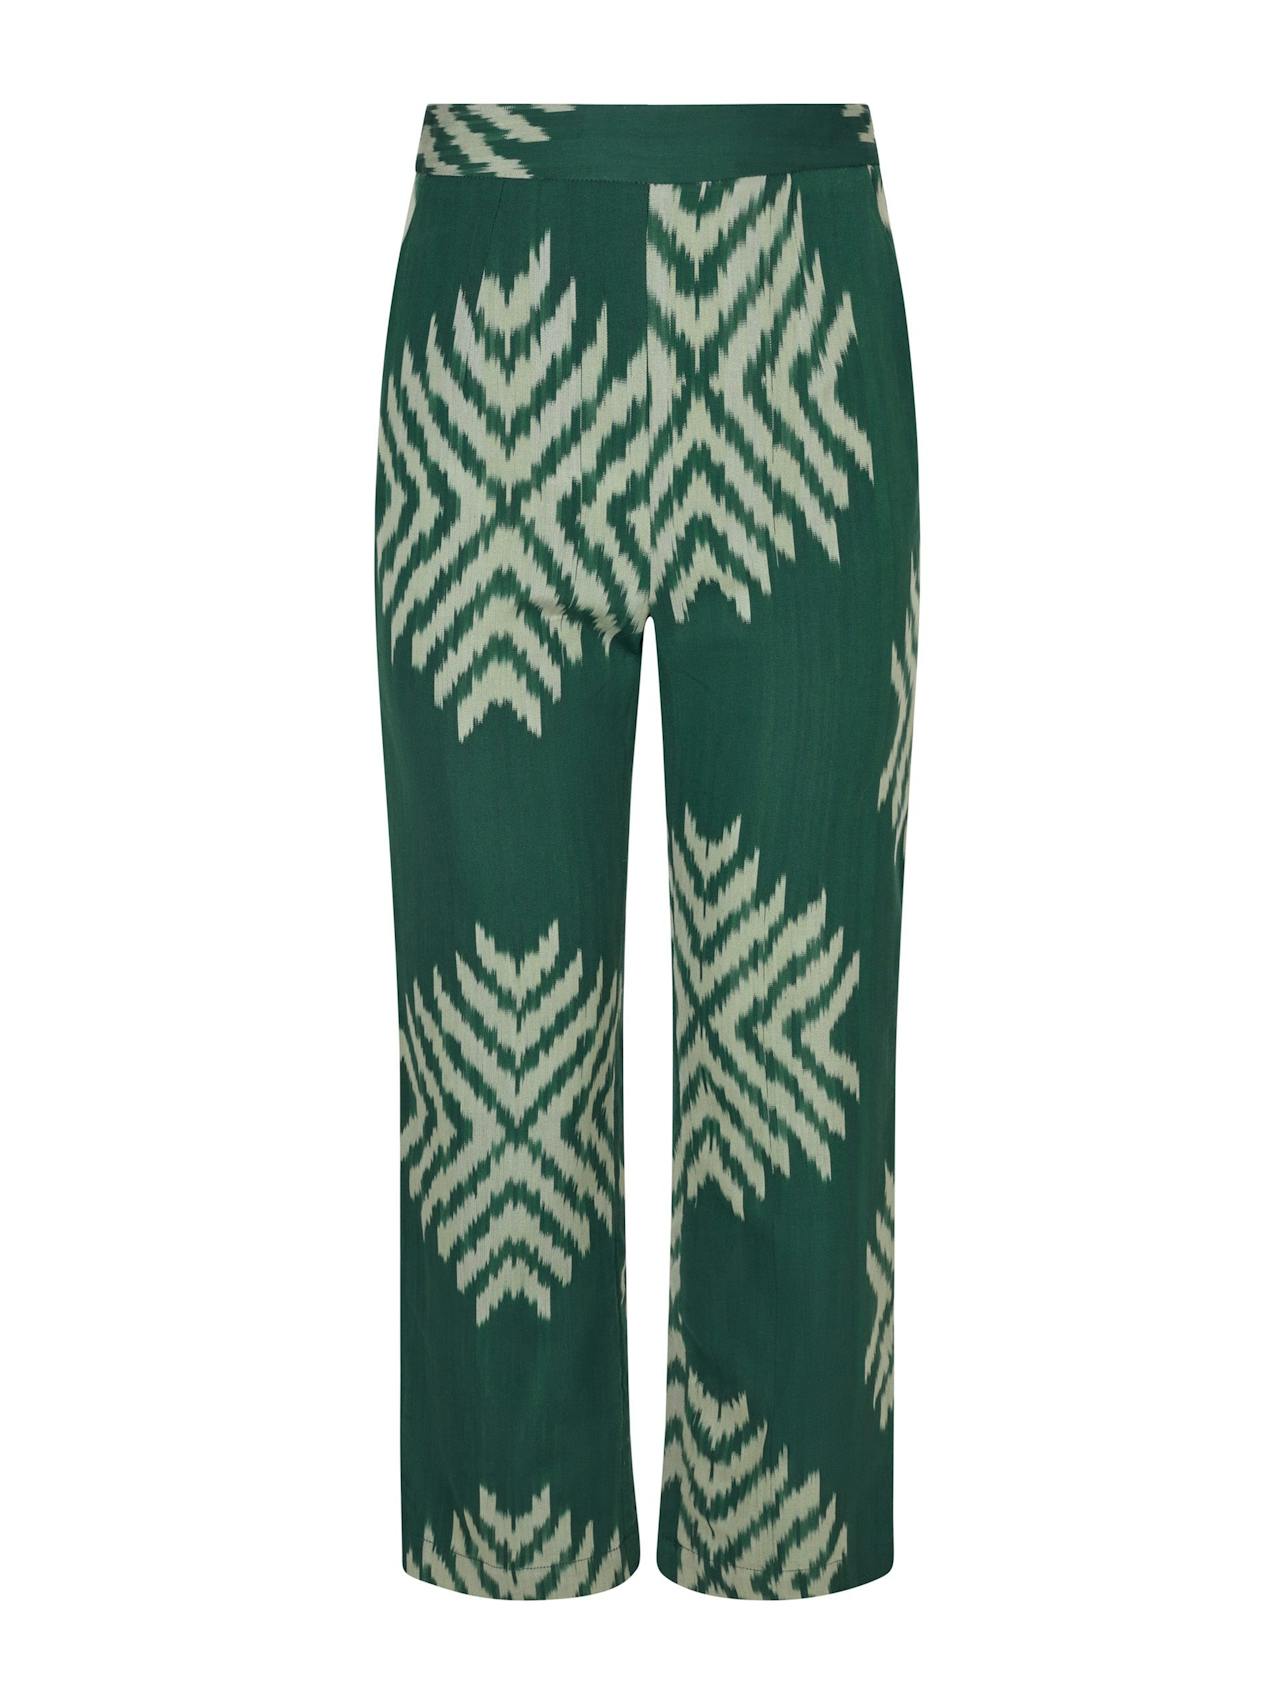 Green cotton mulberry silk Ikat trousers